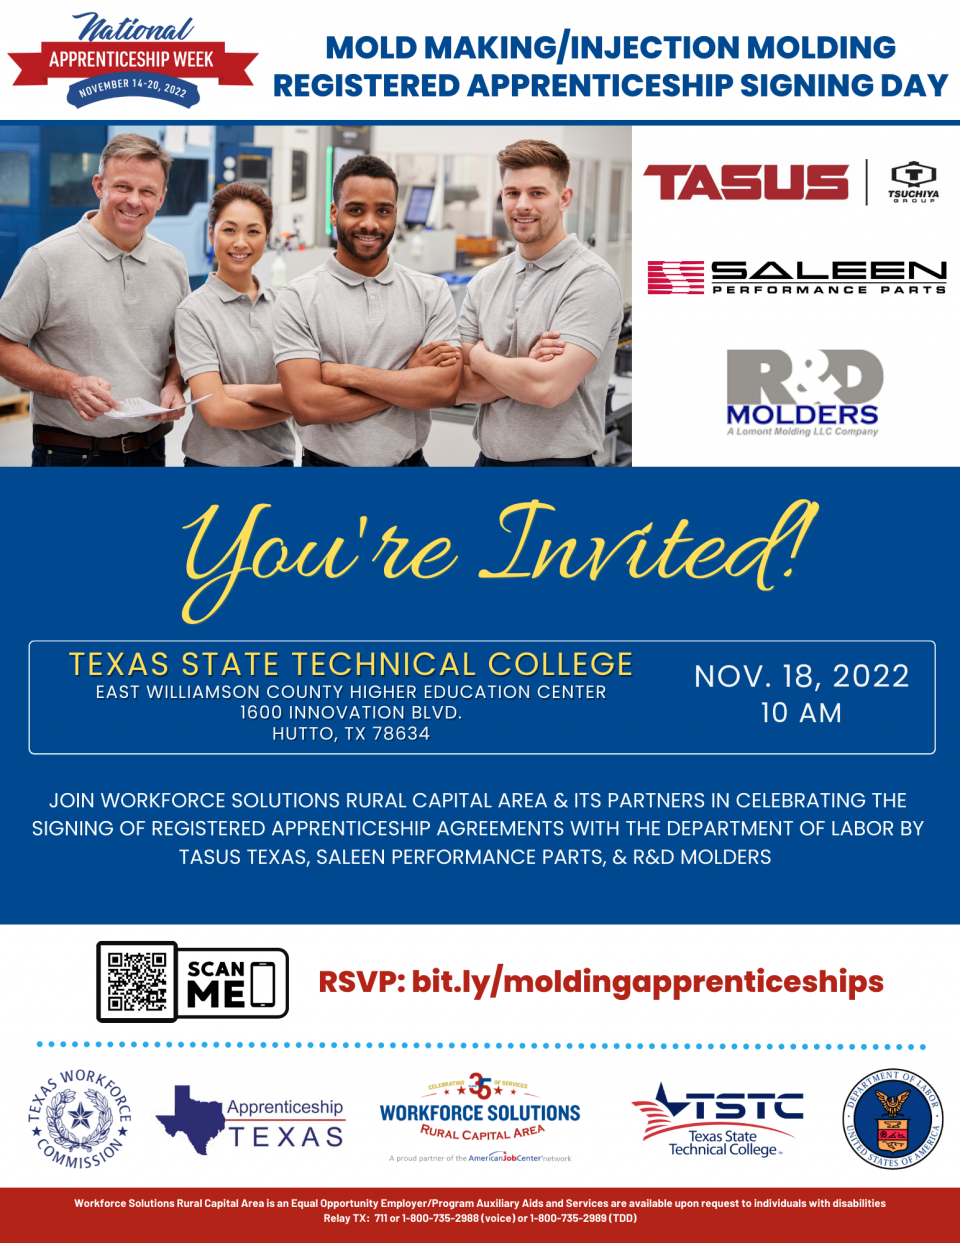 Help Celebrate Manufacturing: Mold Making/Injection Molding Registered Apprenticeship Signing Day on Nov. 18